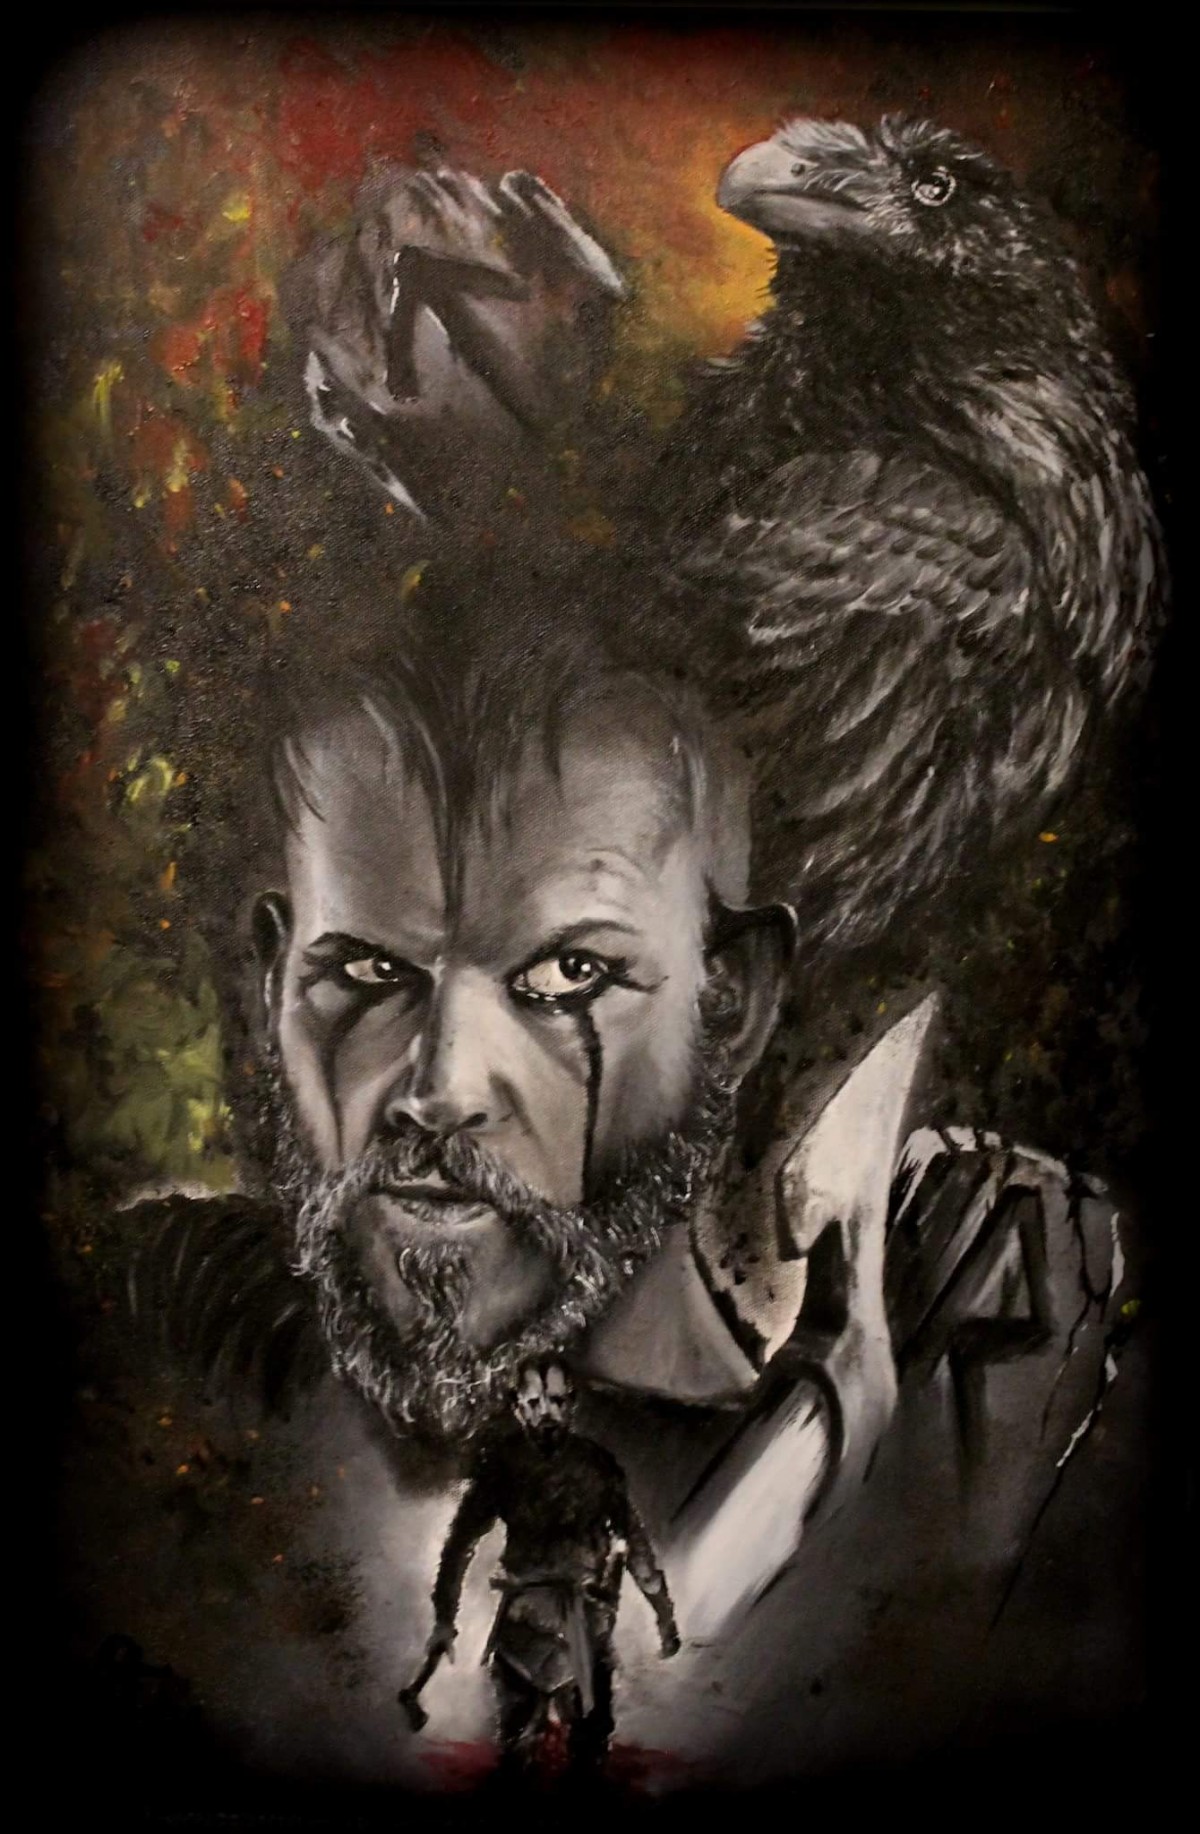 Floki the ship builder by Stan Mad, Painting | Artblr.